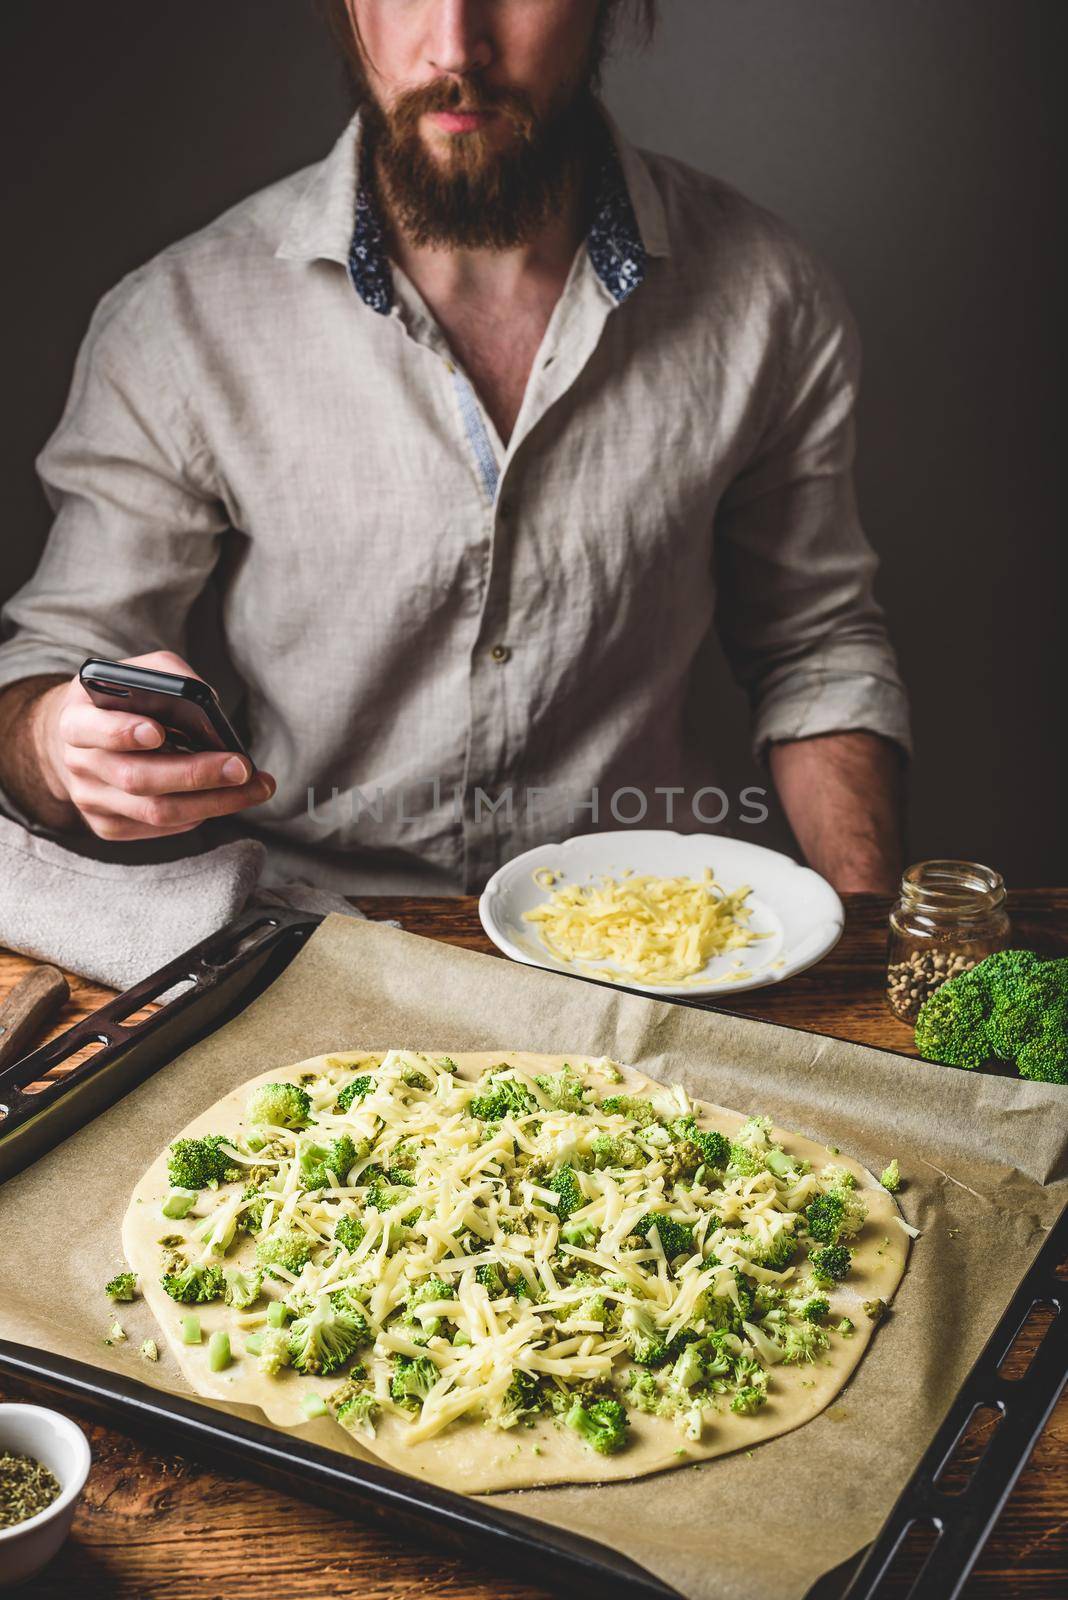 Bearded man surfing phone while cooking pizza with broccoli, pesto sauce, spices and cheese